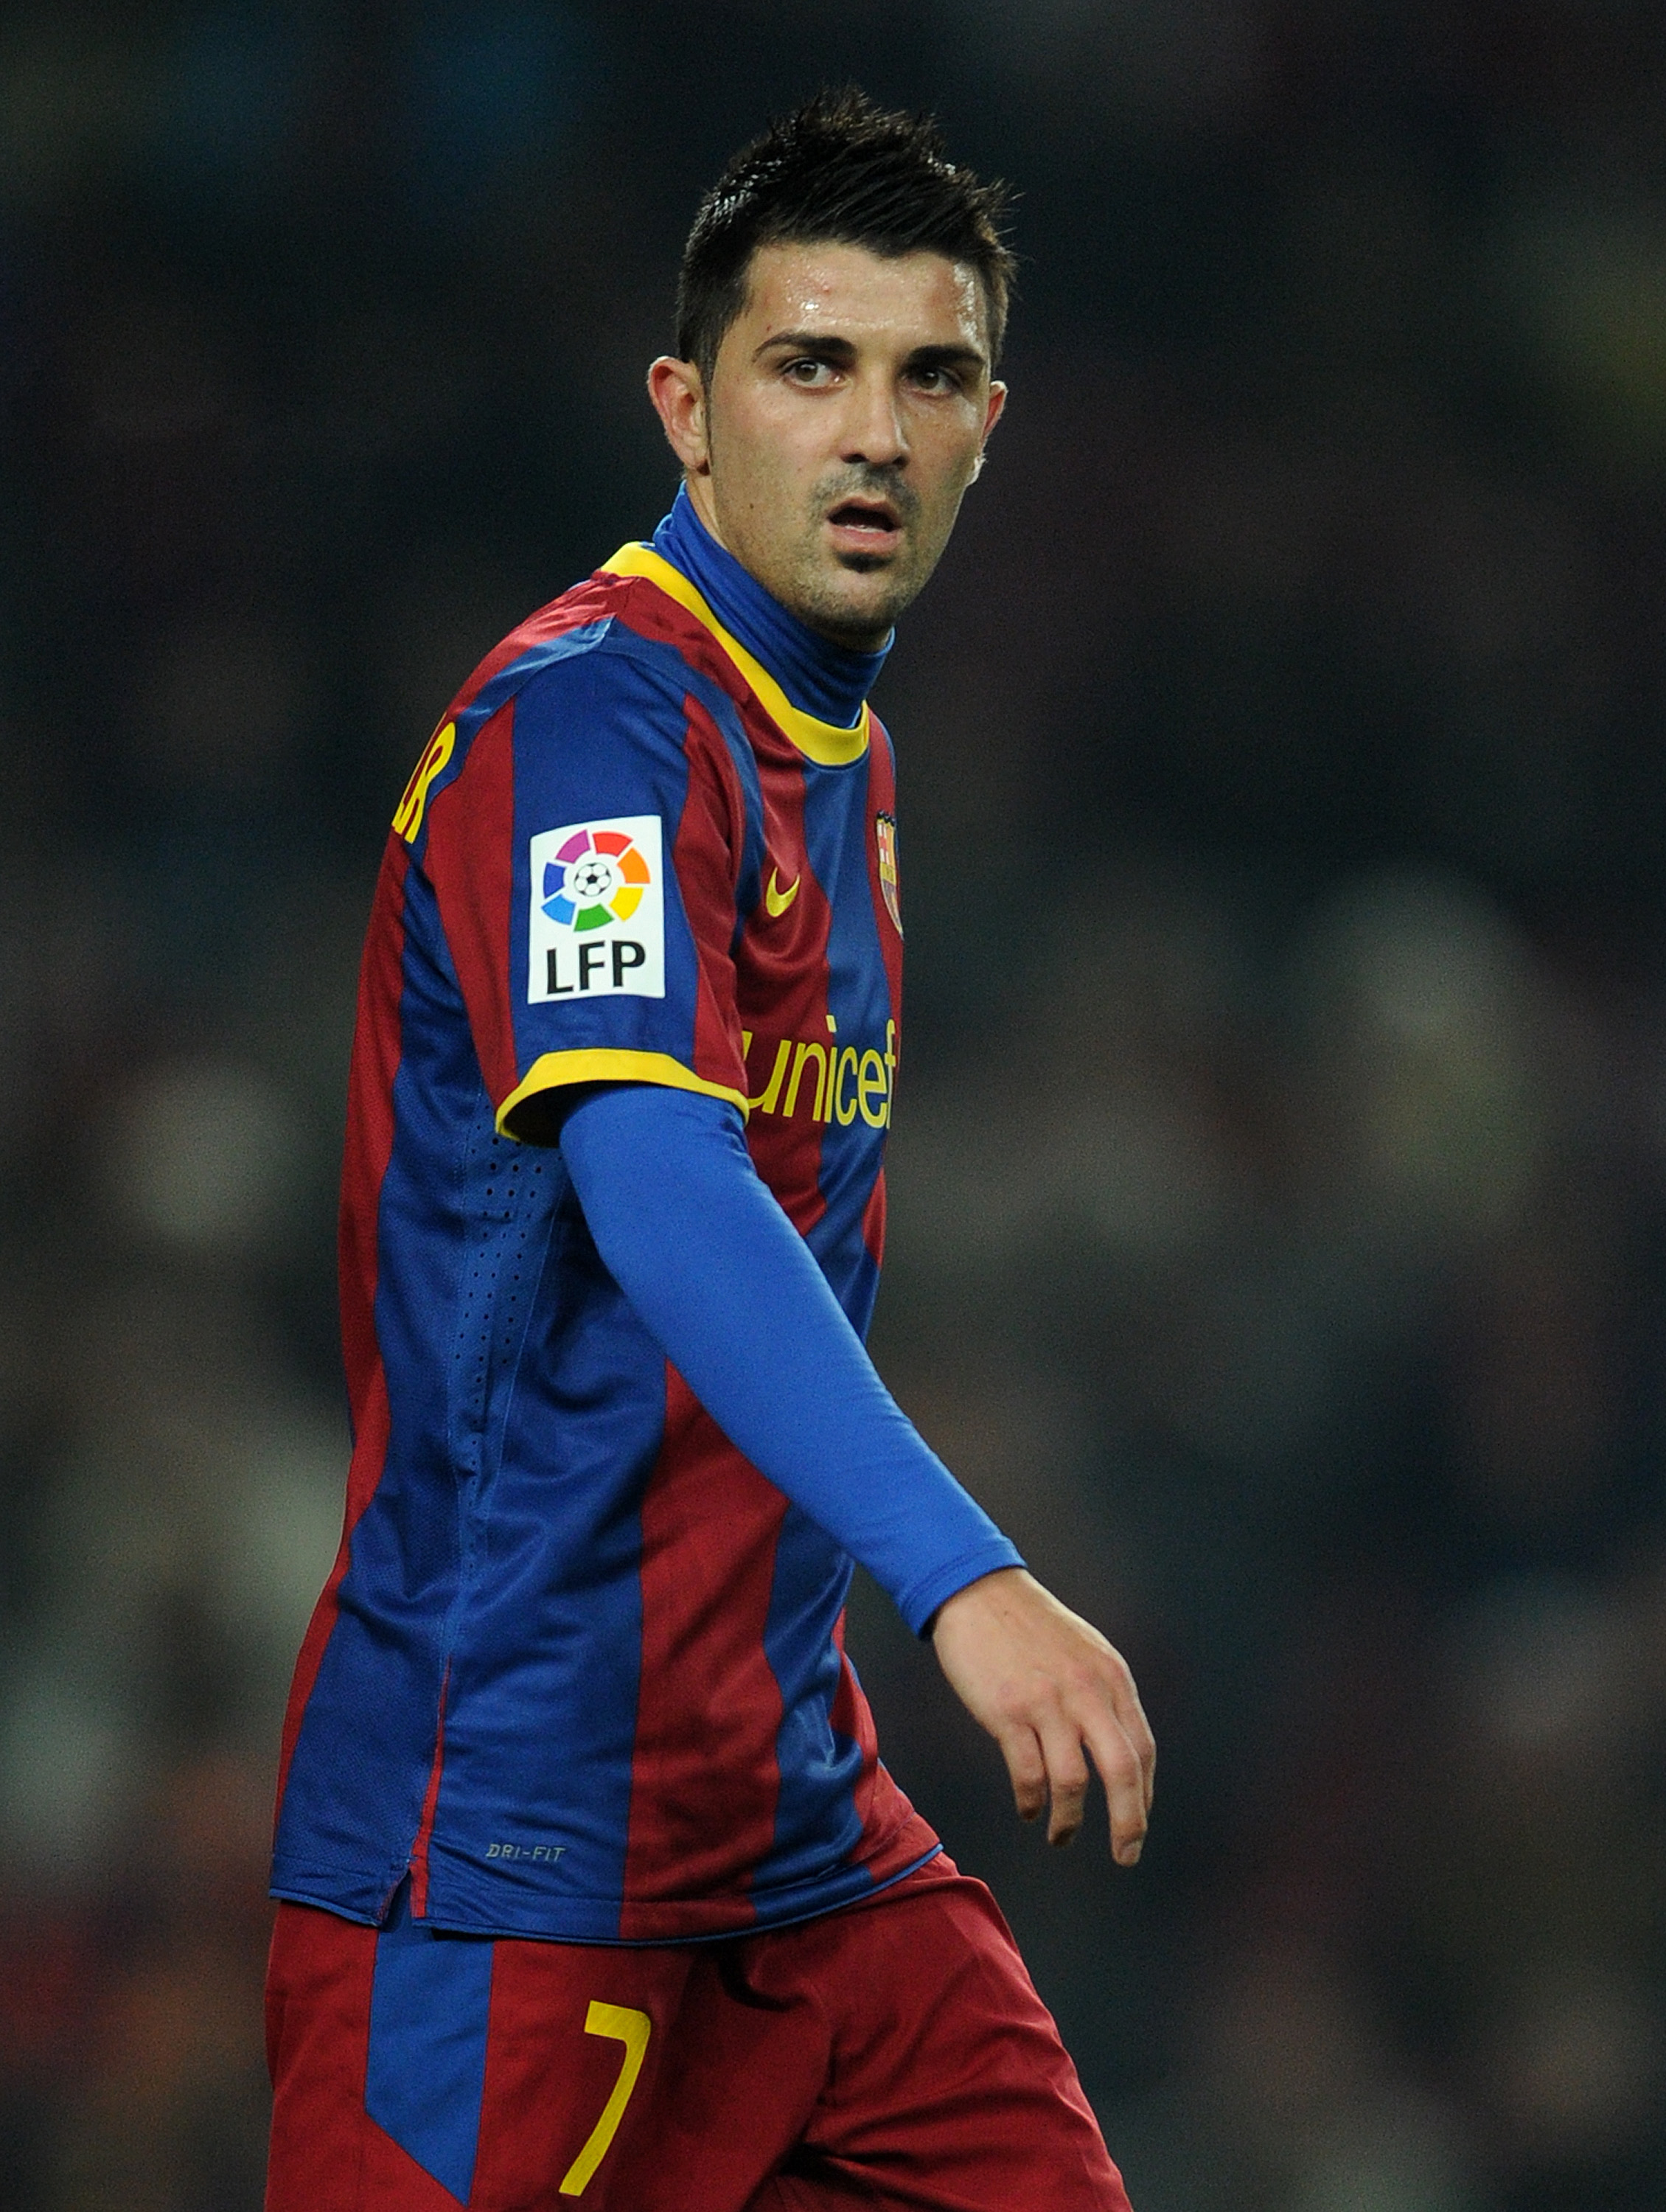 BARCELONA, SPAIN - DECEMBER 21:  David Villa of Barcelona looks on during the round of last 16 Copa del Rey match between FC Barcelona and Athletic Bilbao at the Camp Nou stadium on December 21, 2010 in Barcelona, Spain.  (Photo by Jasper Juinen/Getty Ima